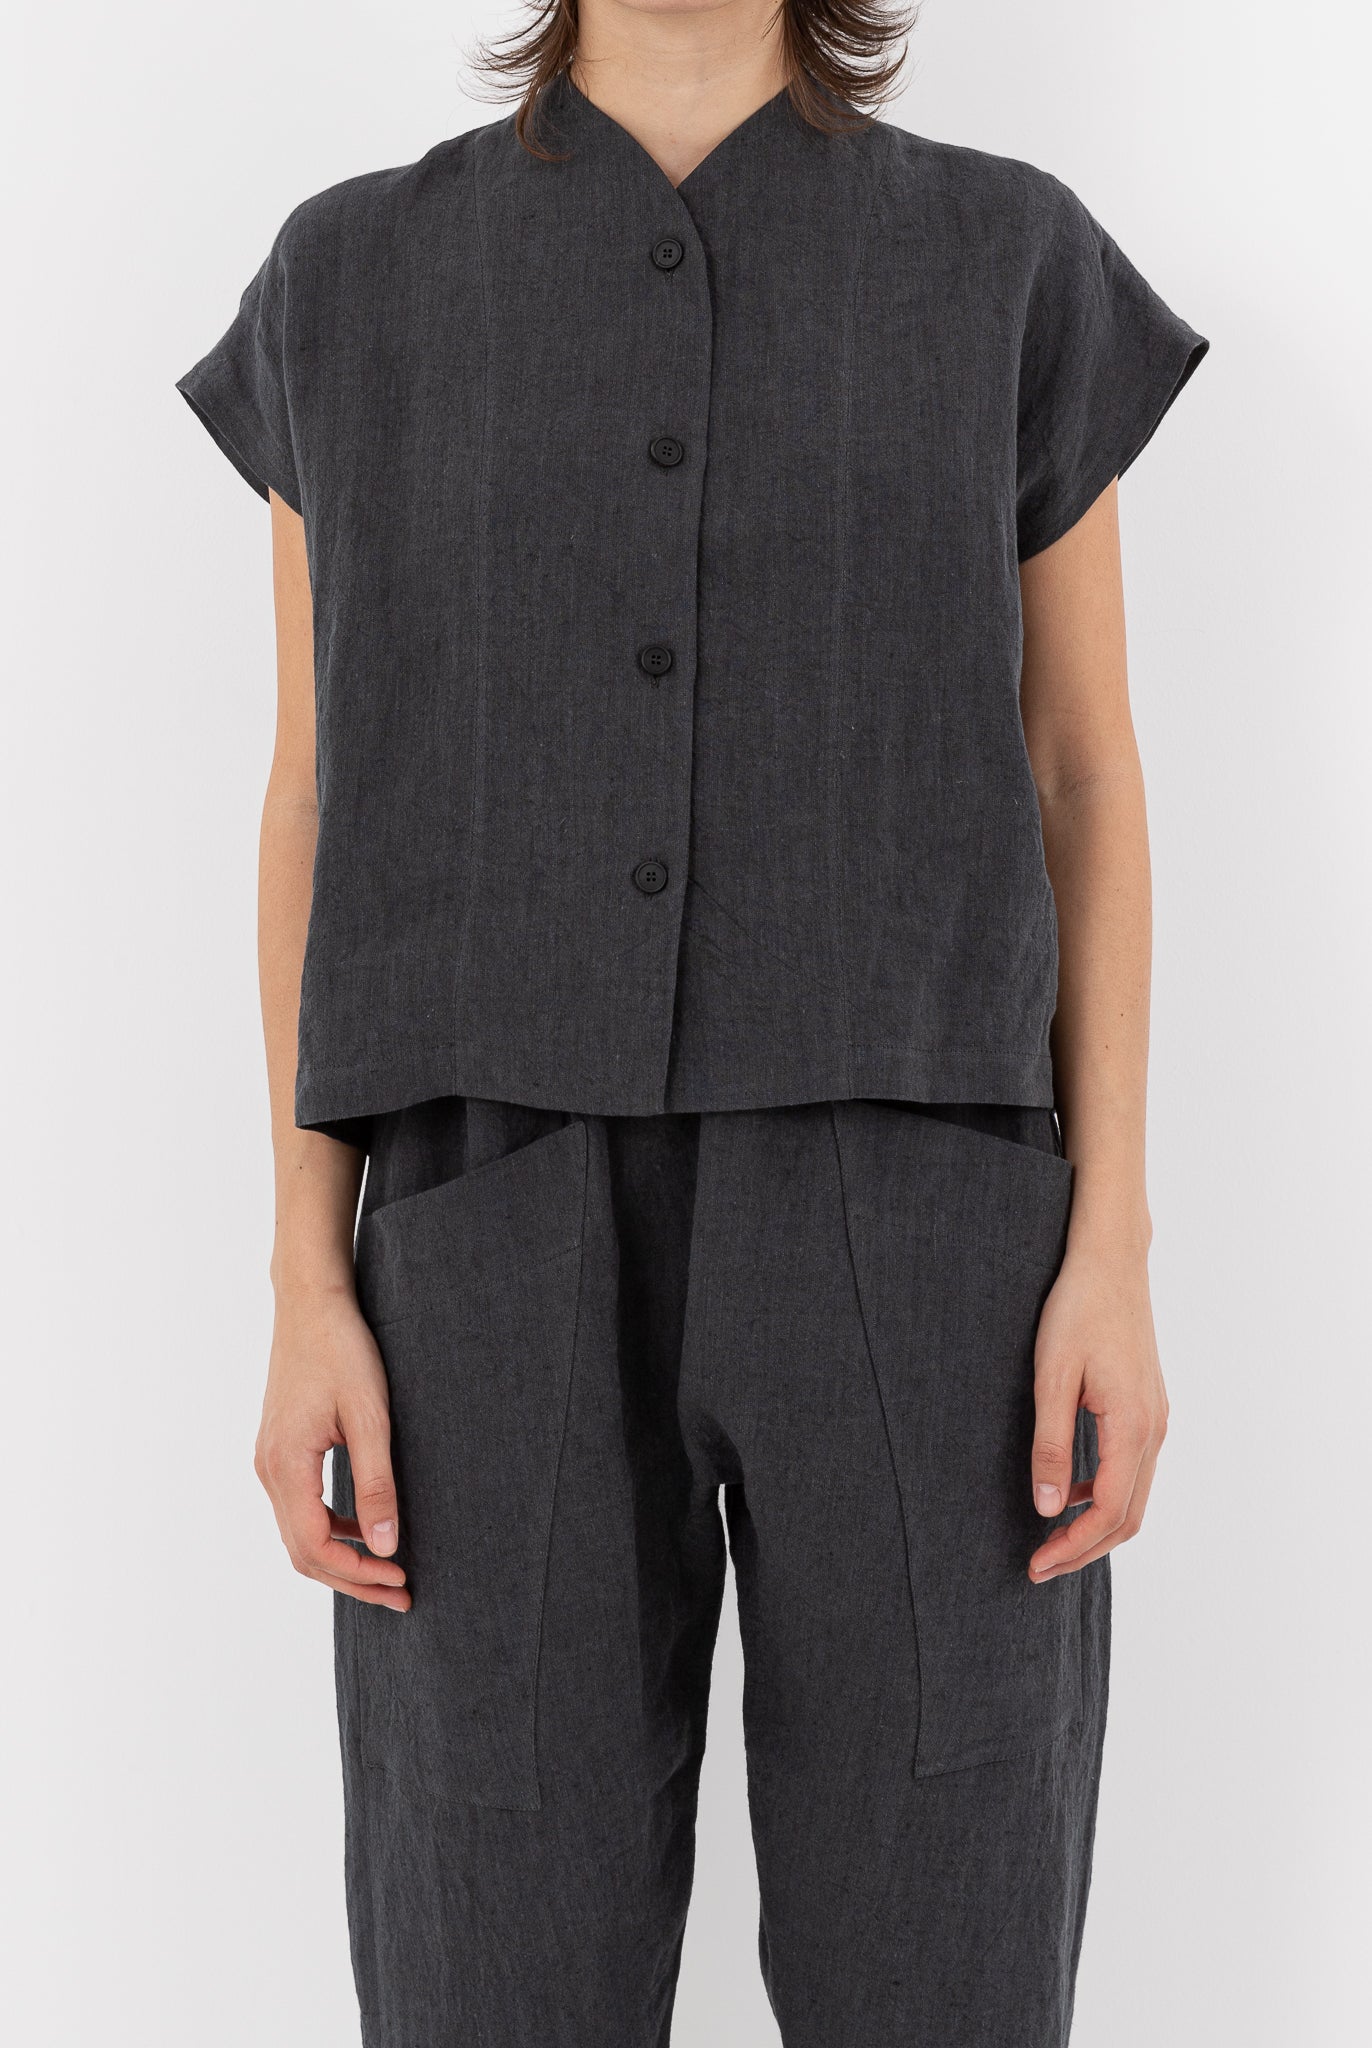 COS Silk Shirt With 3⁄4 Sleeves in Black for Men